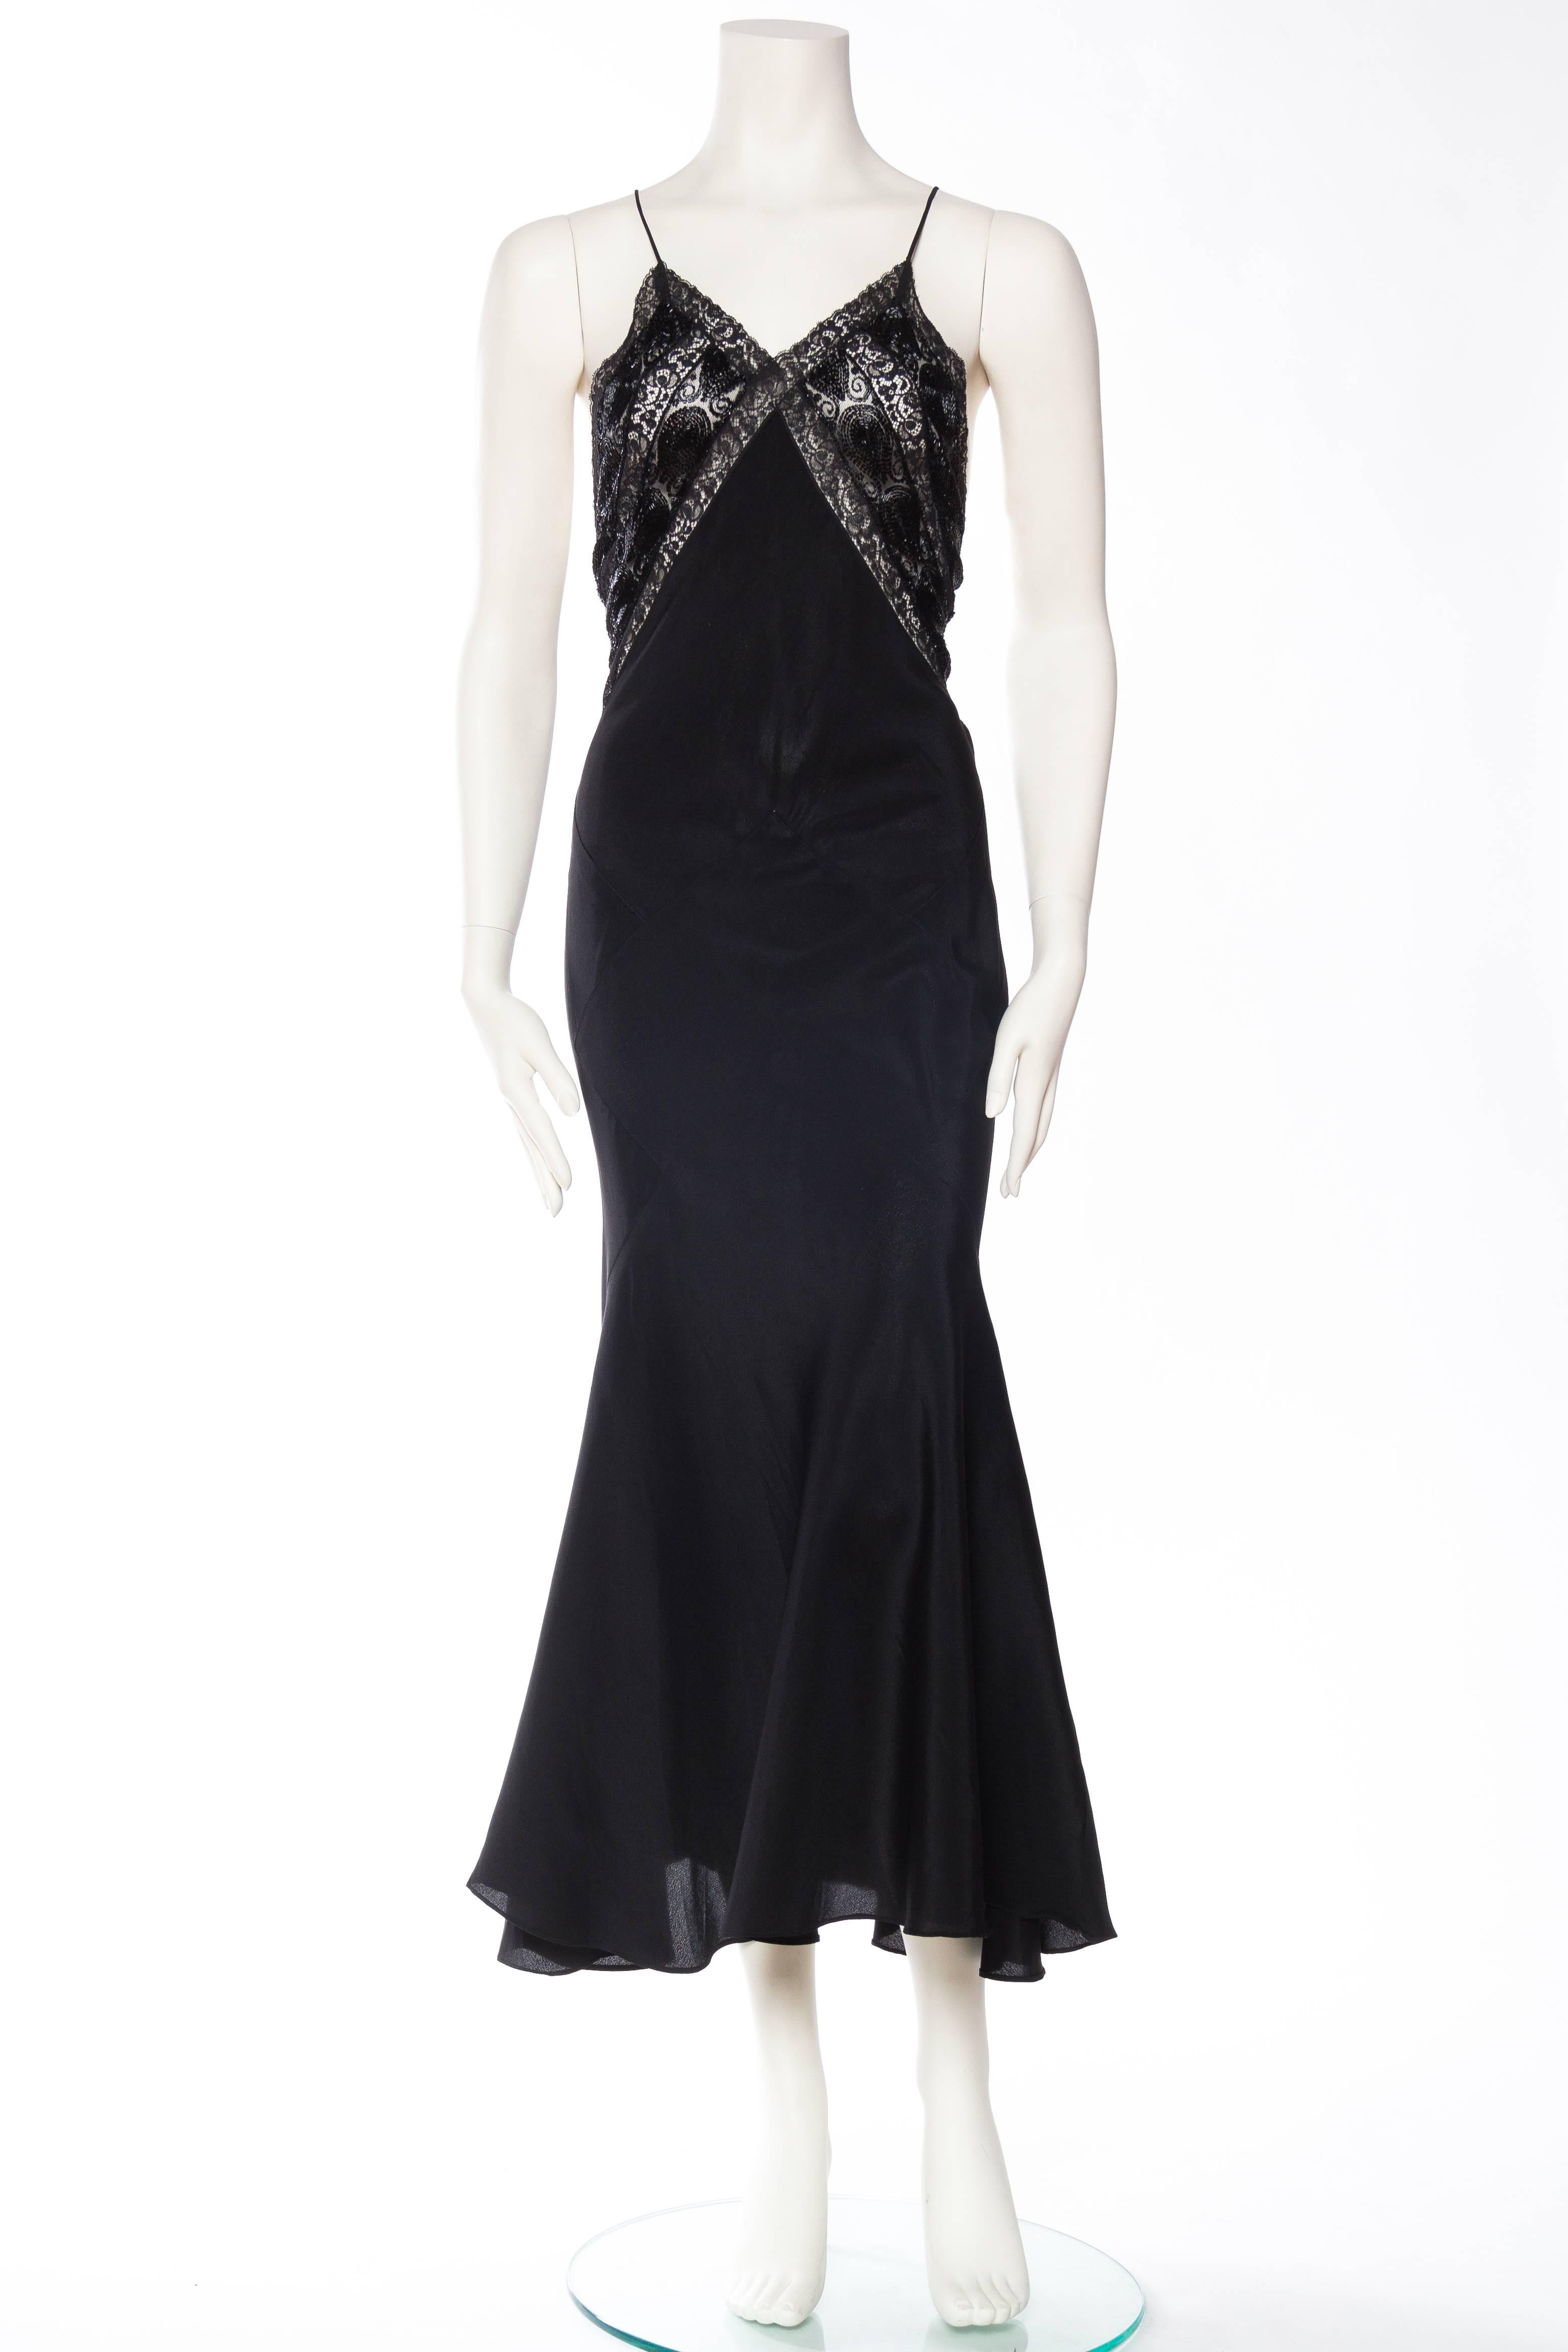 This gown is made from a recycled 1930s bias cut gown. The bodice is entirely new made in our NYC atelier using antique Edwardian beaded lace. MORPHEW COLLECTION Black Bias Cut Silk Crepe De Chine Backless Gown With Edwardian Beaded Lace 
MORPHEW